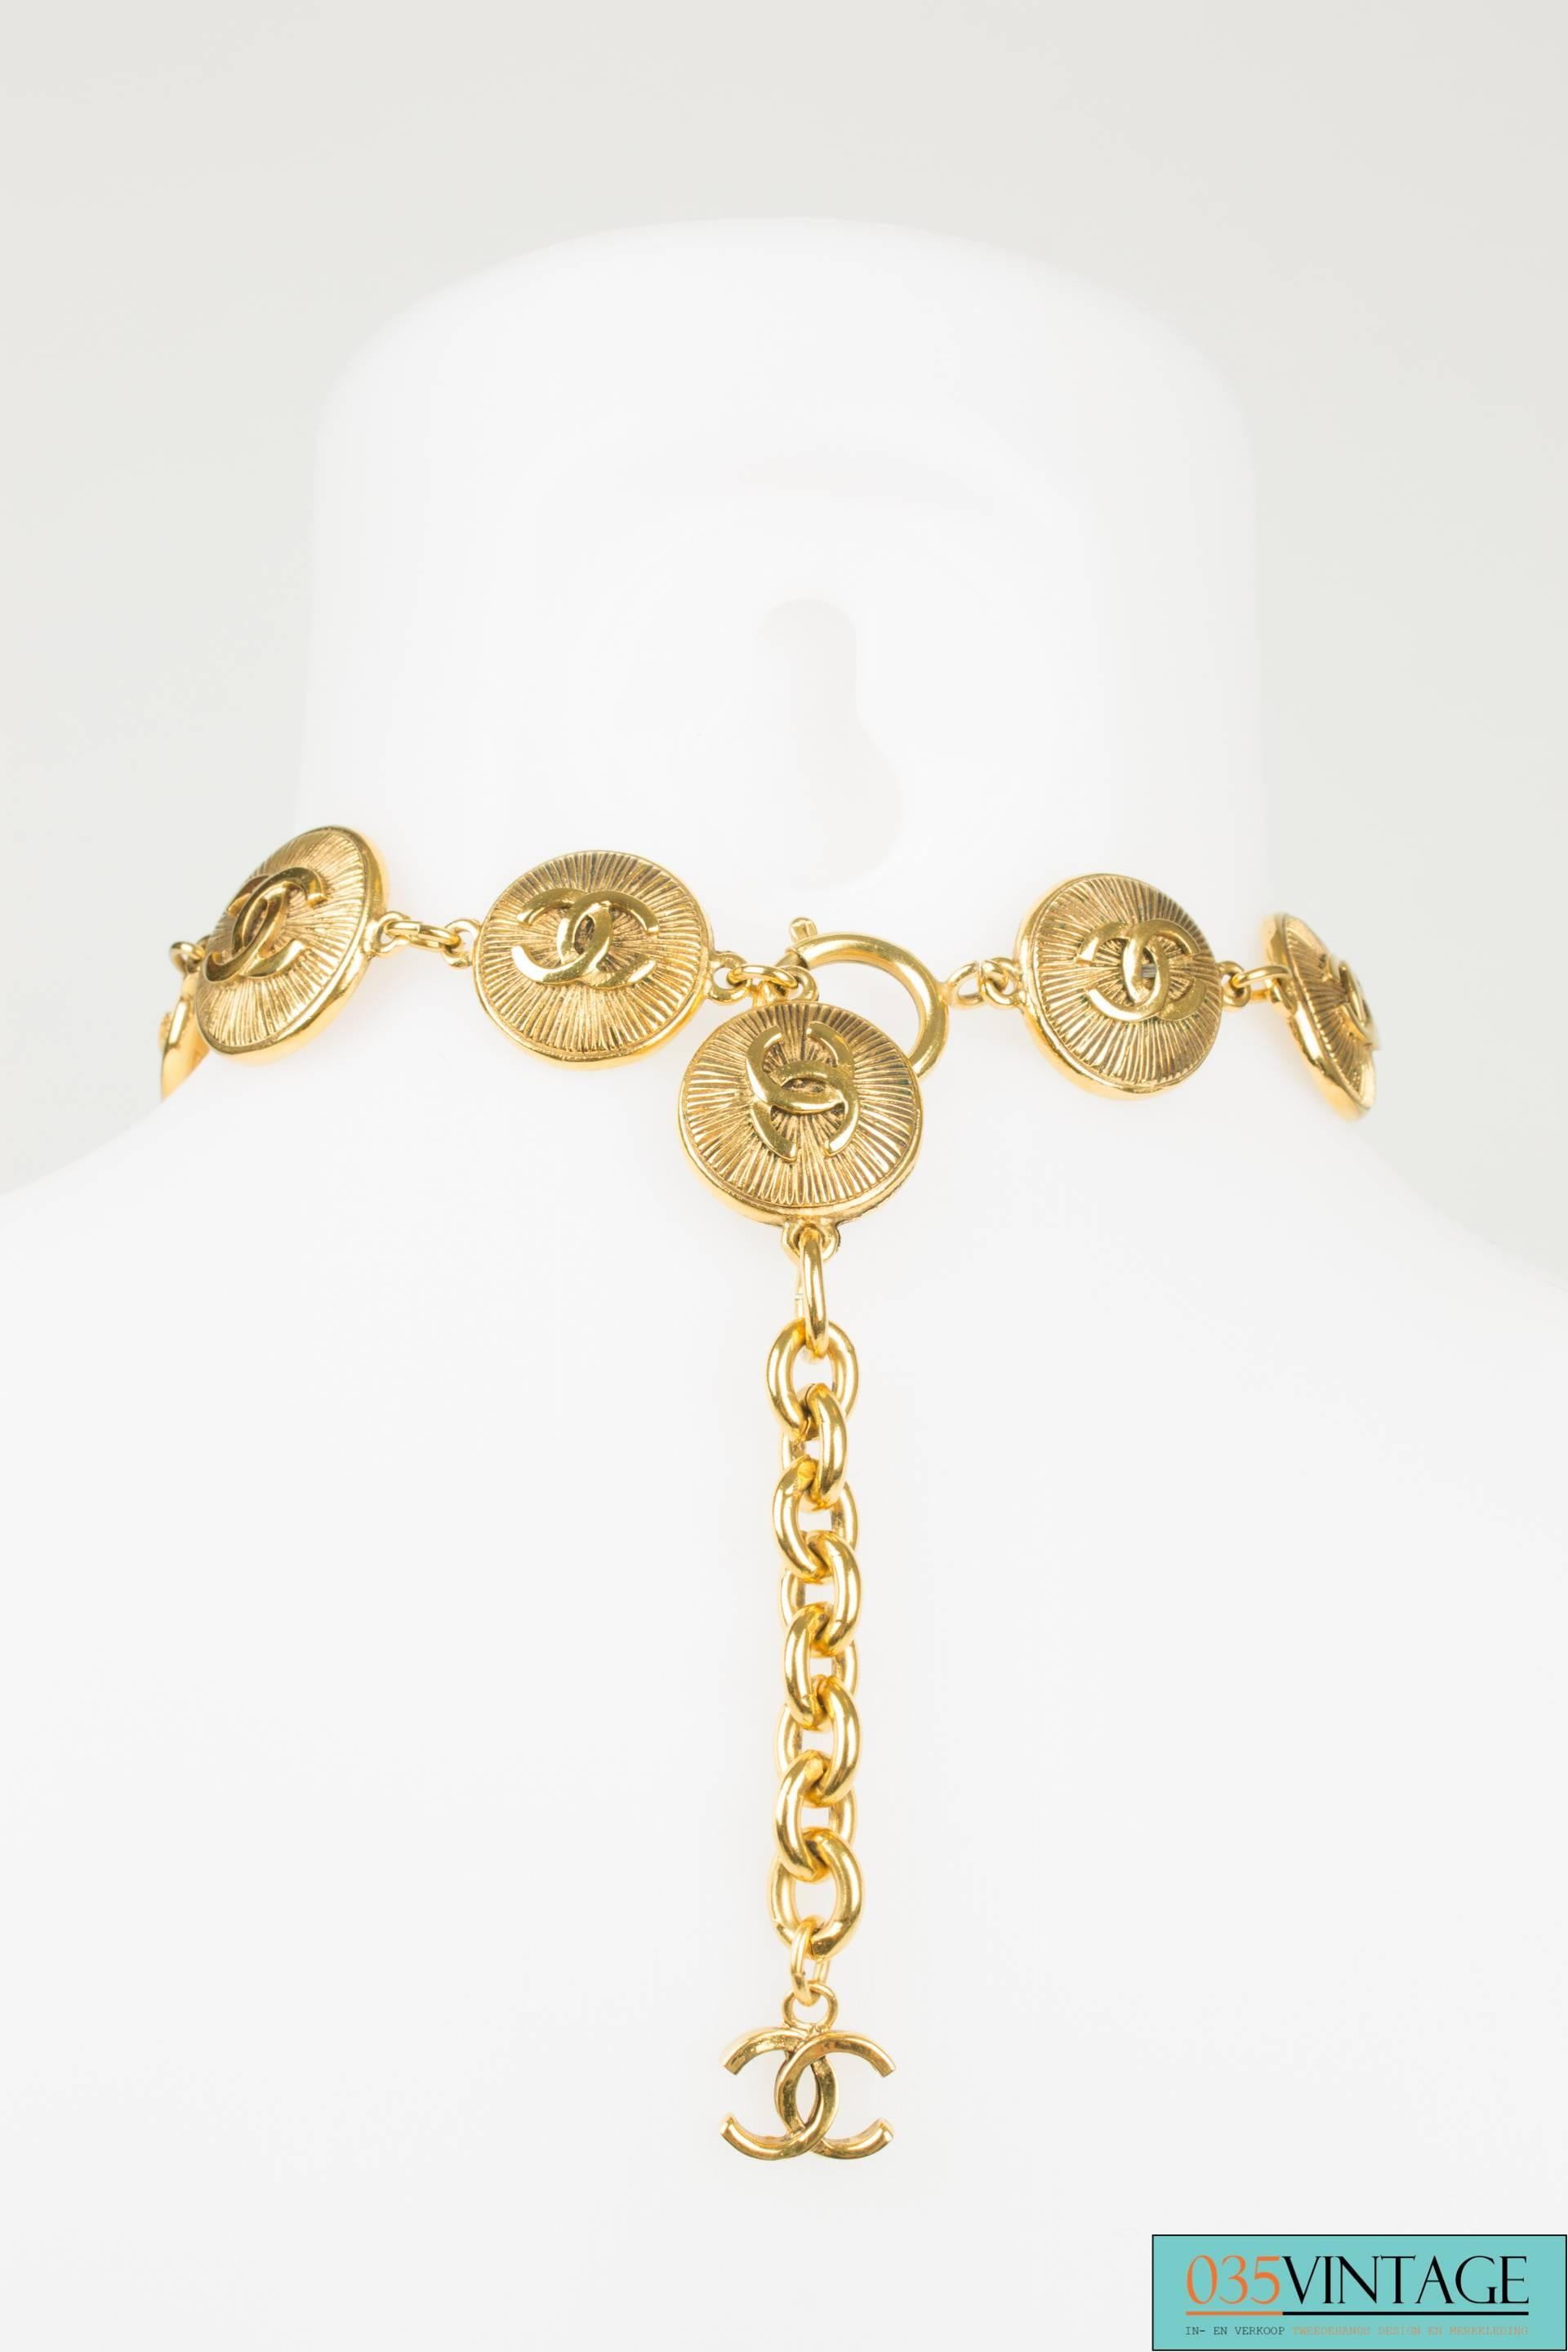 A beautiful vintage necklace by Chanel from the 80's! Super stylish!

This Chanel Rue Cambon Paris necklace can be worn long or short. Made of 11 medaillons in different sizes, a large interlocking CC logo in the center. Around this logo little